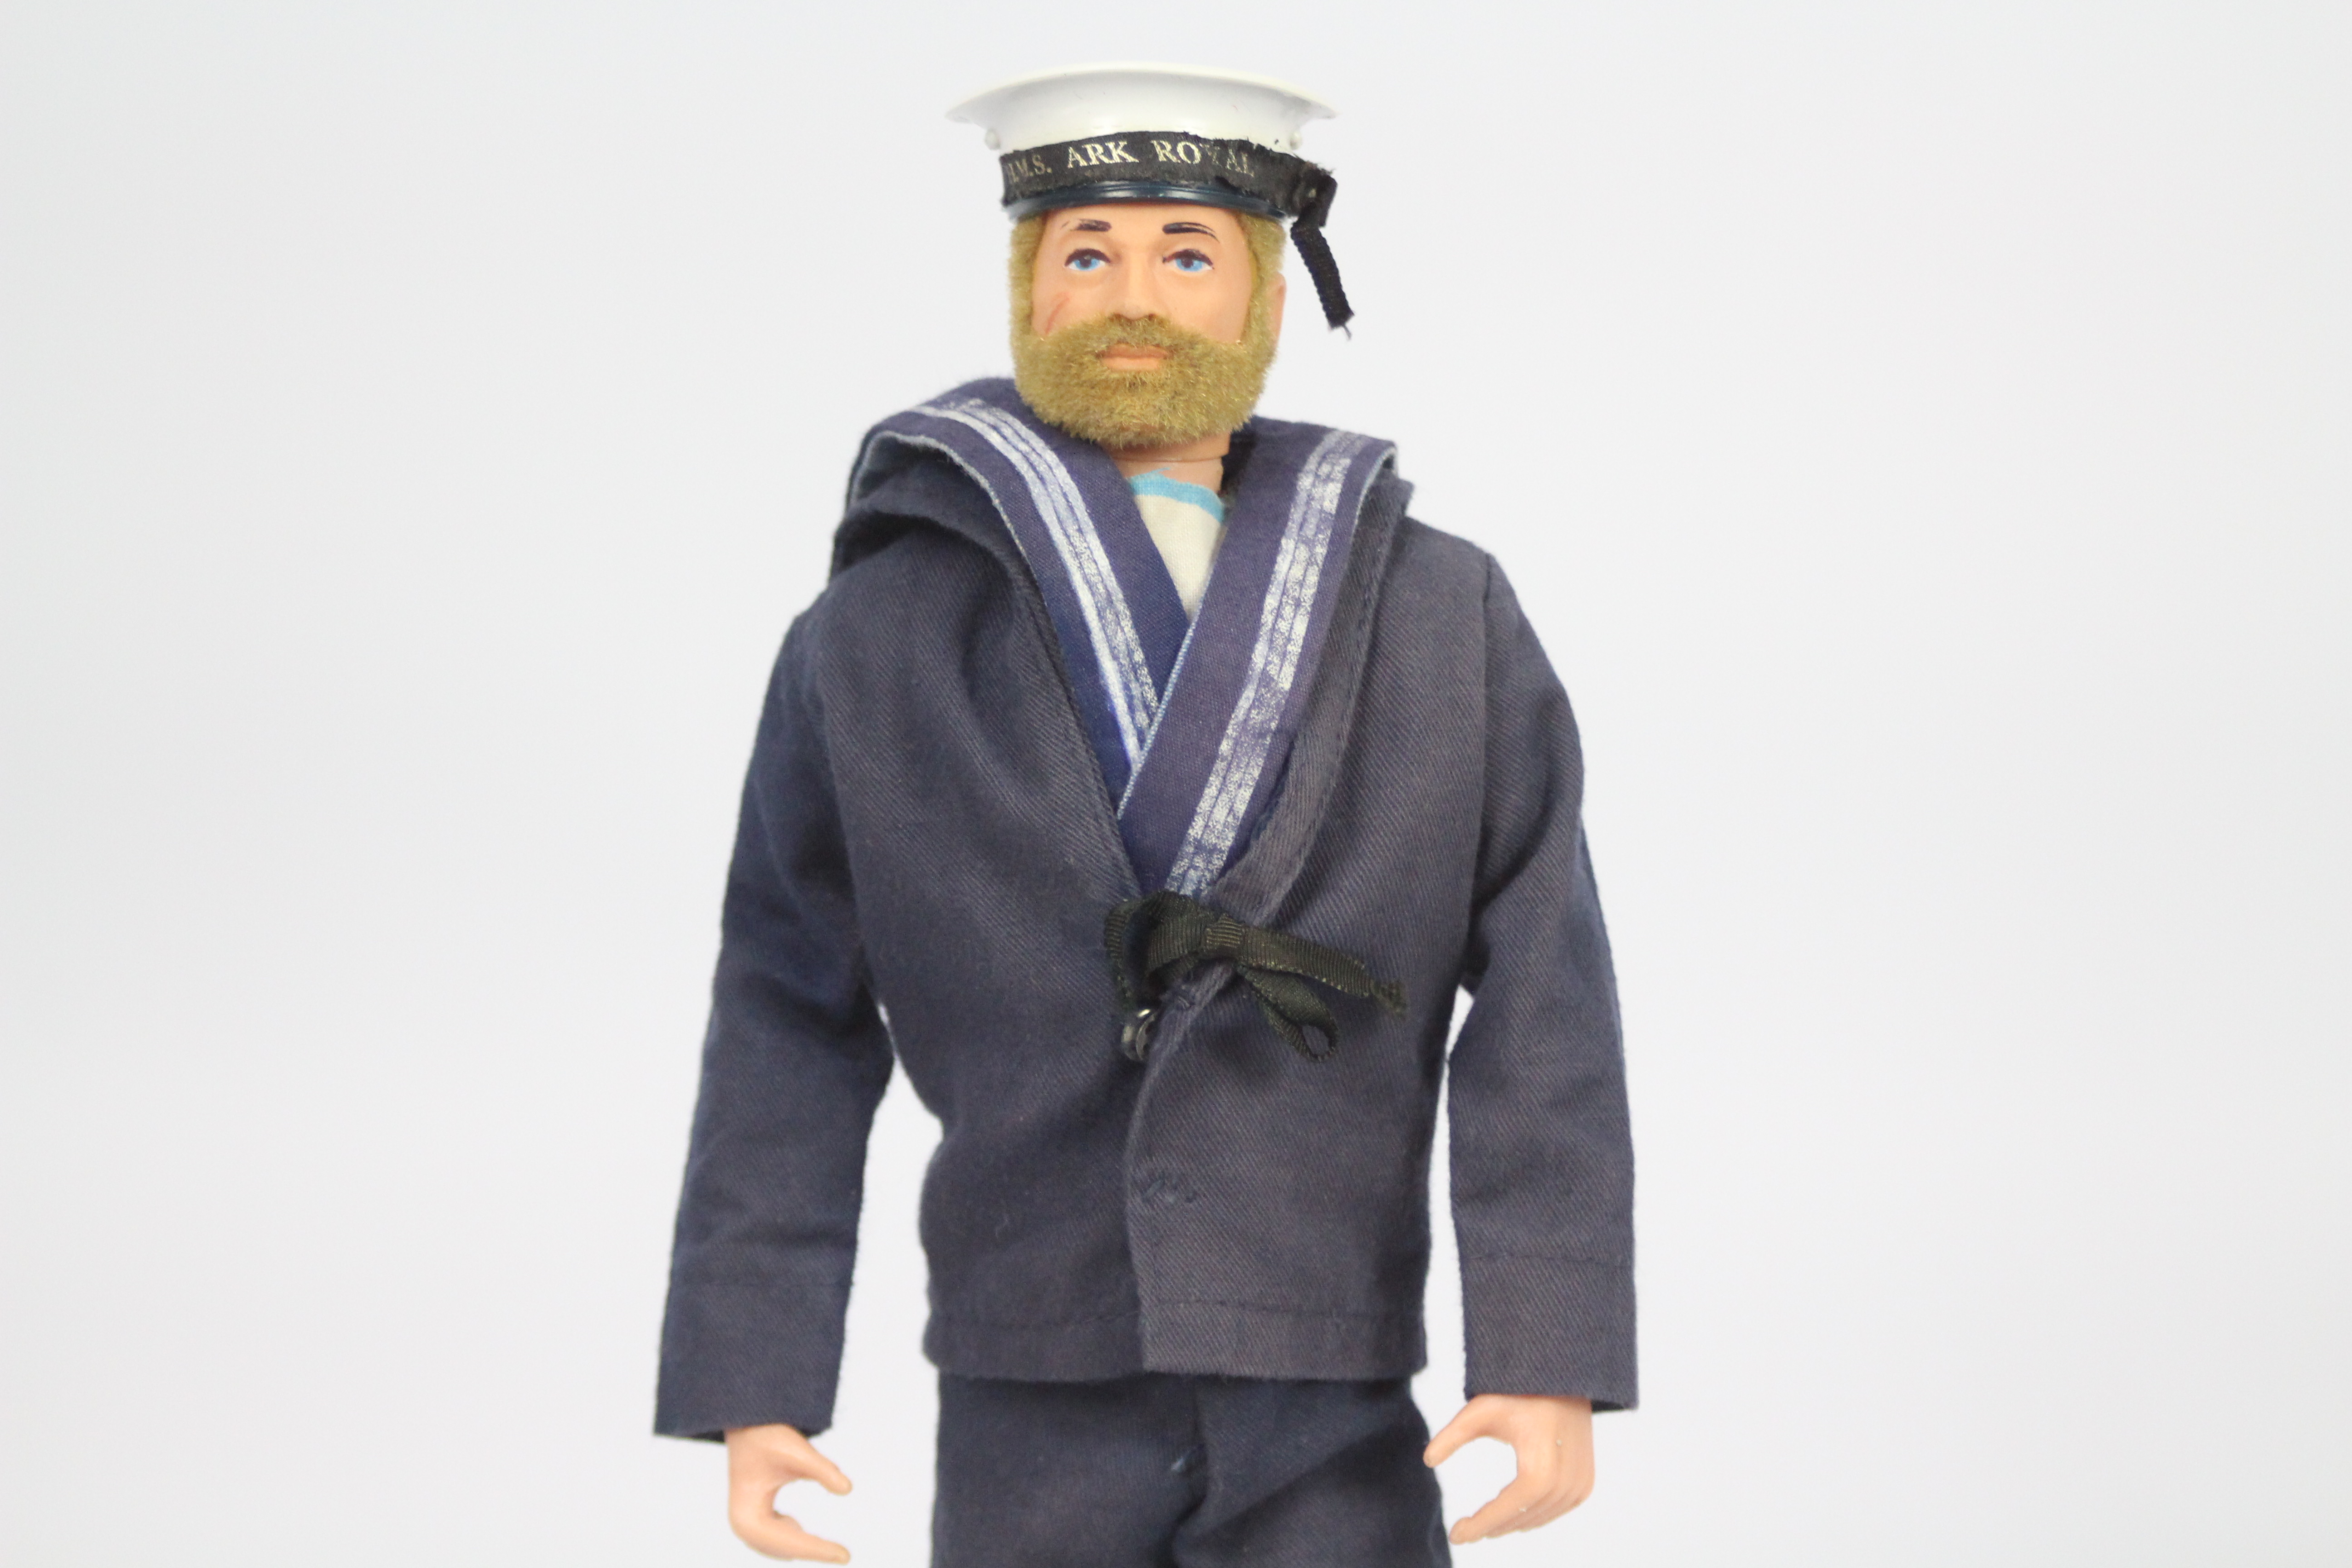 Palitoy, Action Man - A Palitoy Action Man figure in Sailor outfit. - Image 4 of 9